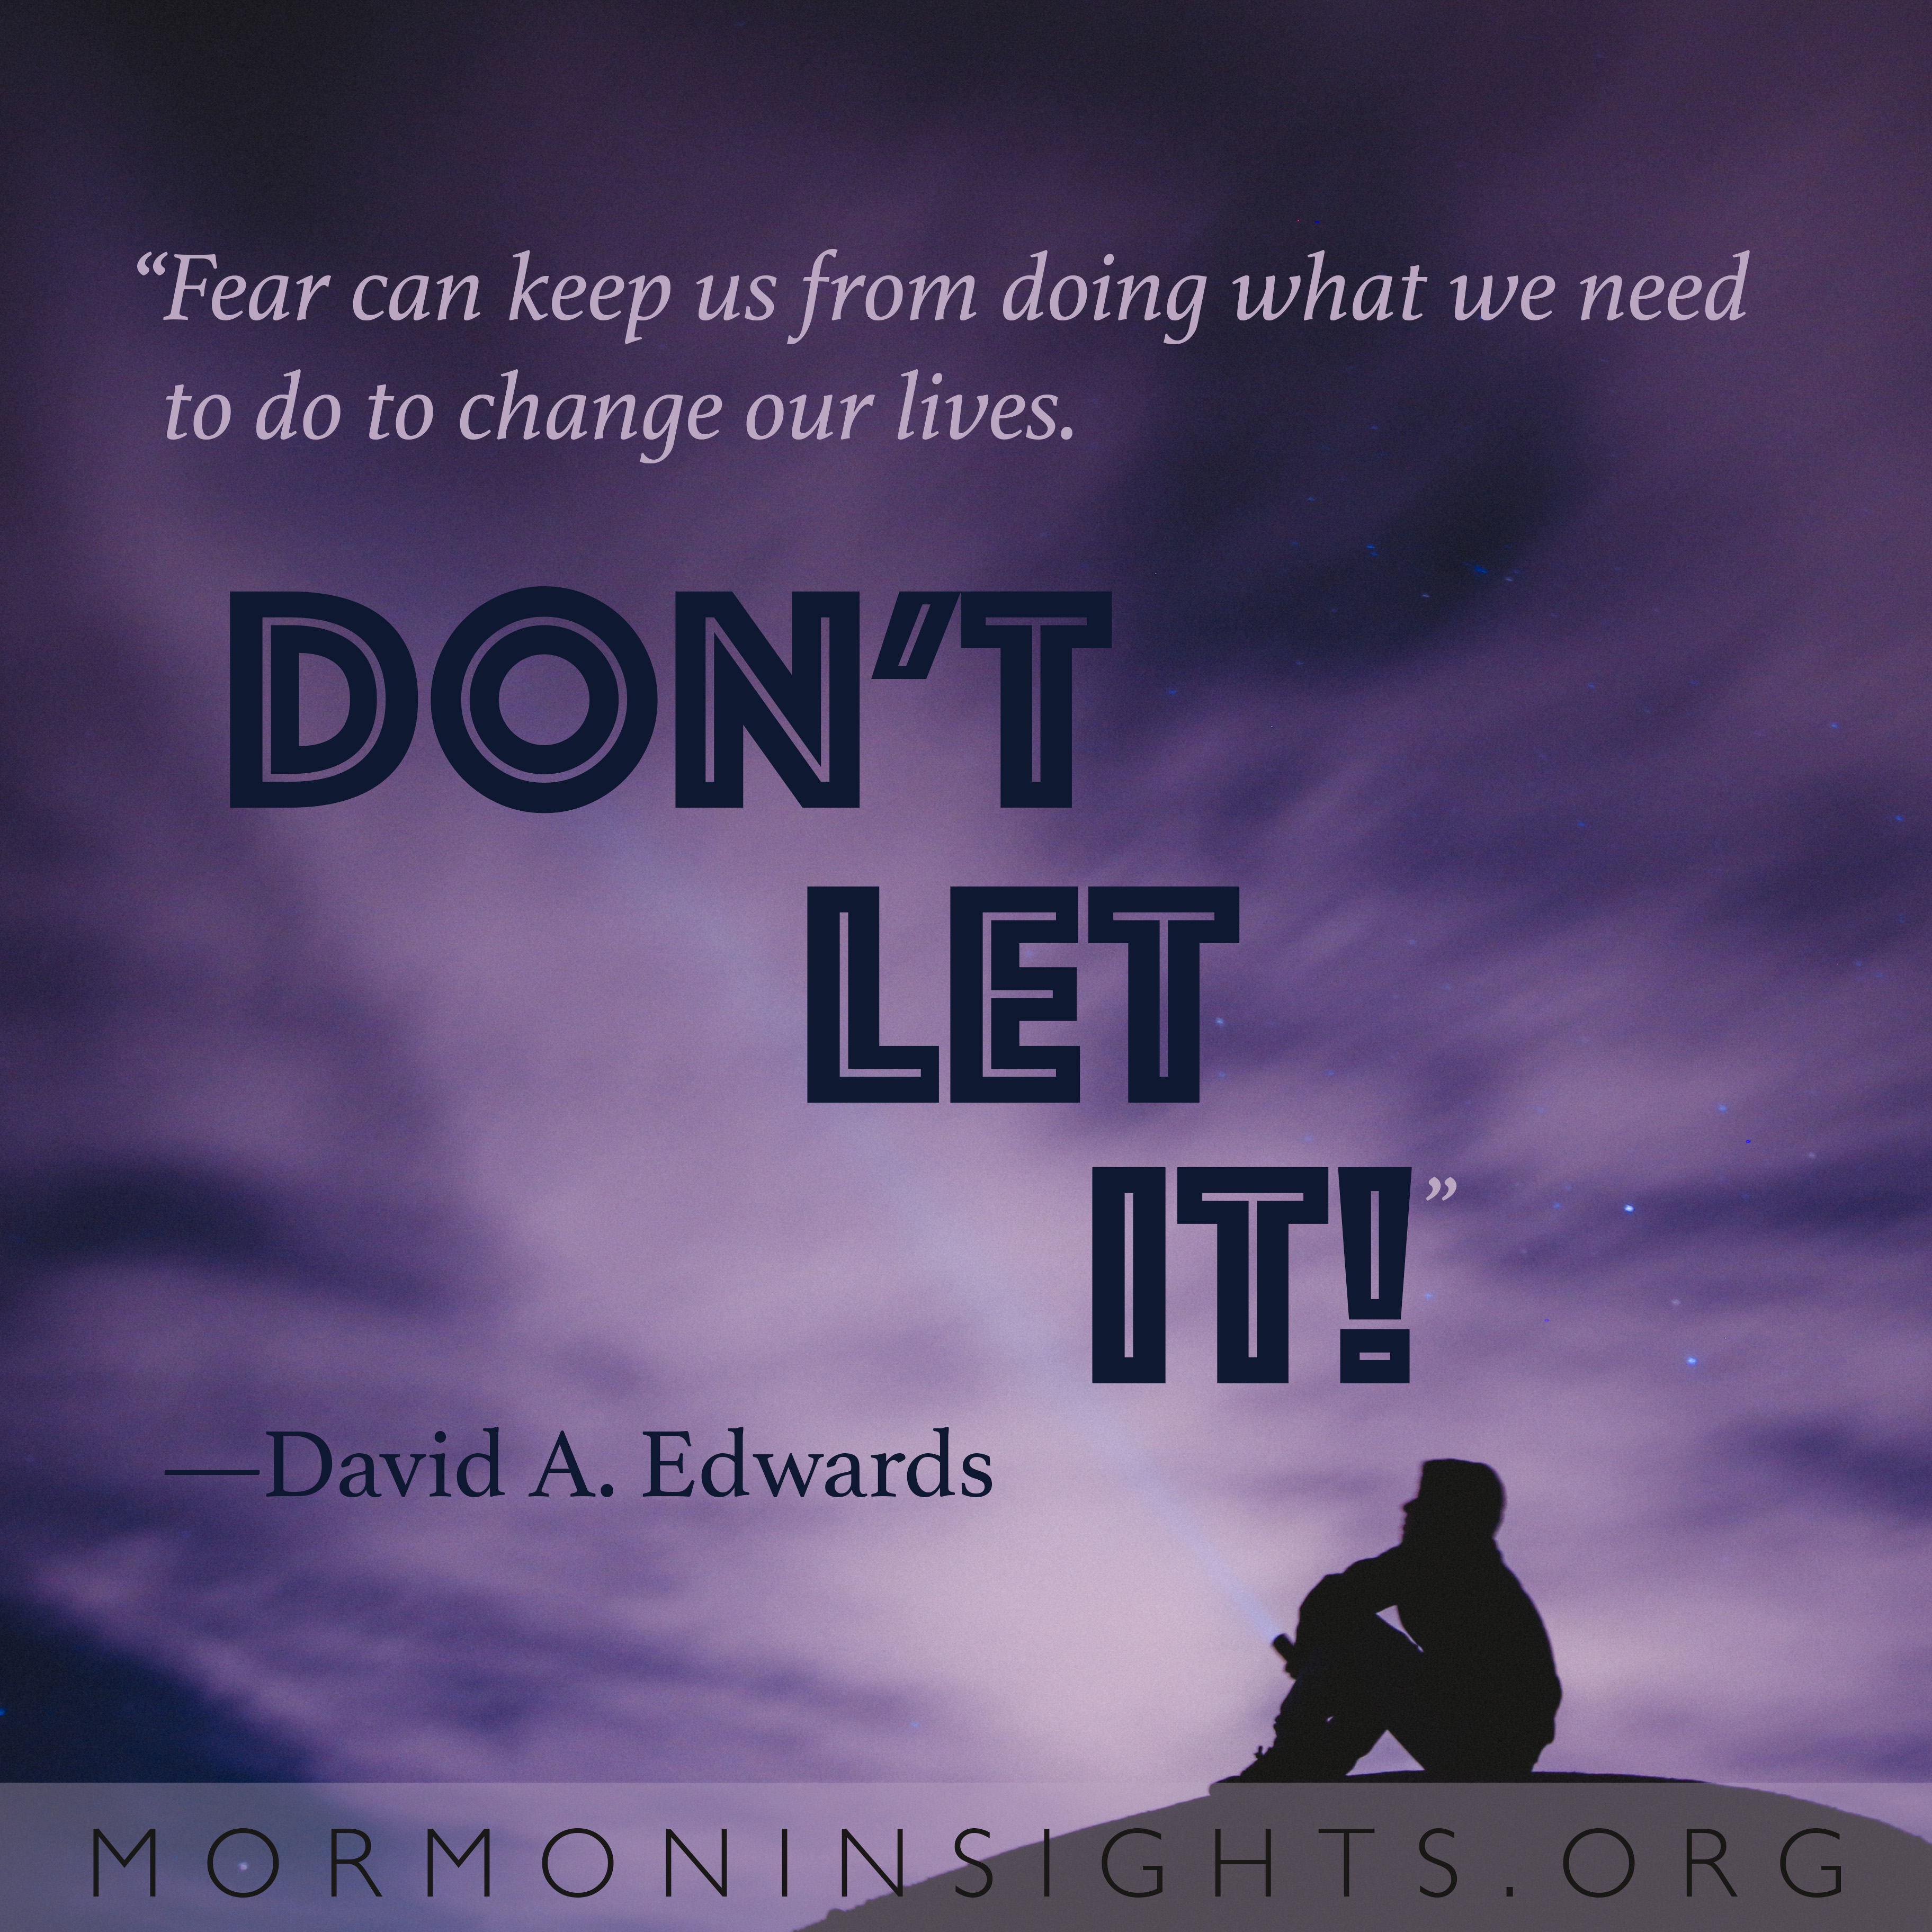 "Fear can keep us from doing what we need to do to change our lives." -David A. Edwards